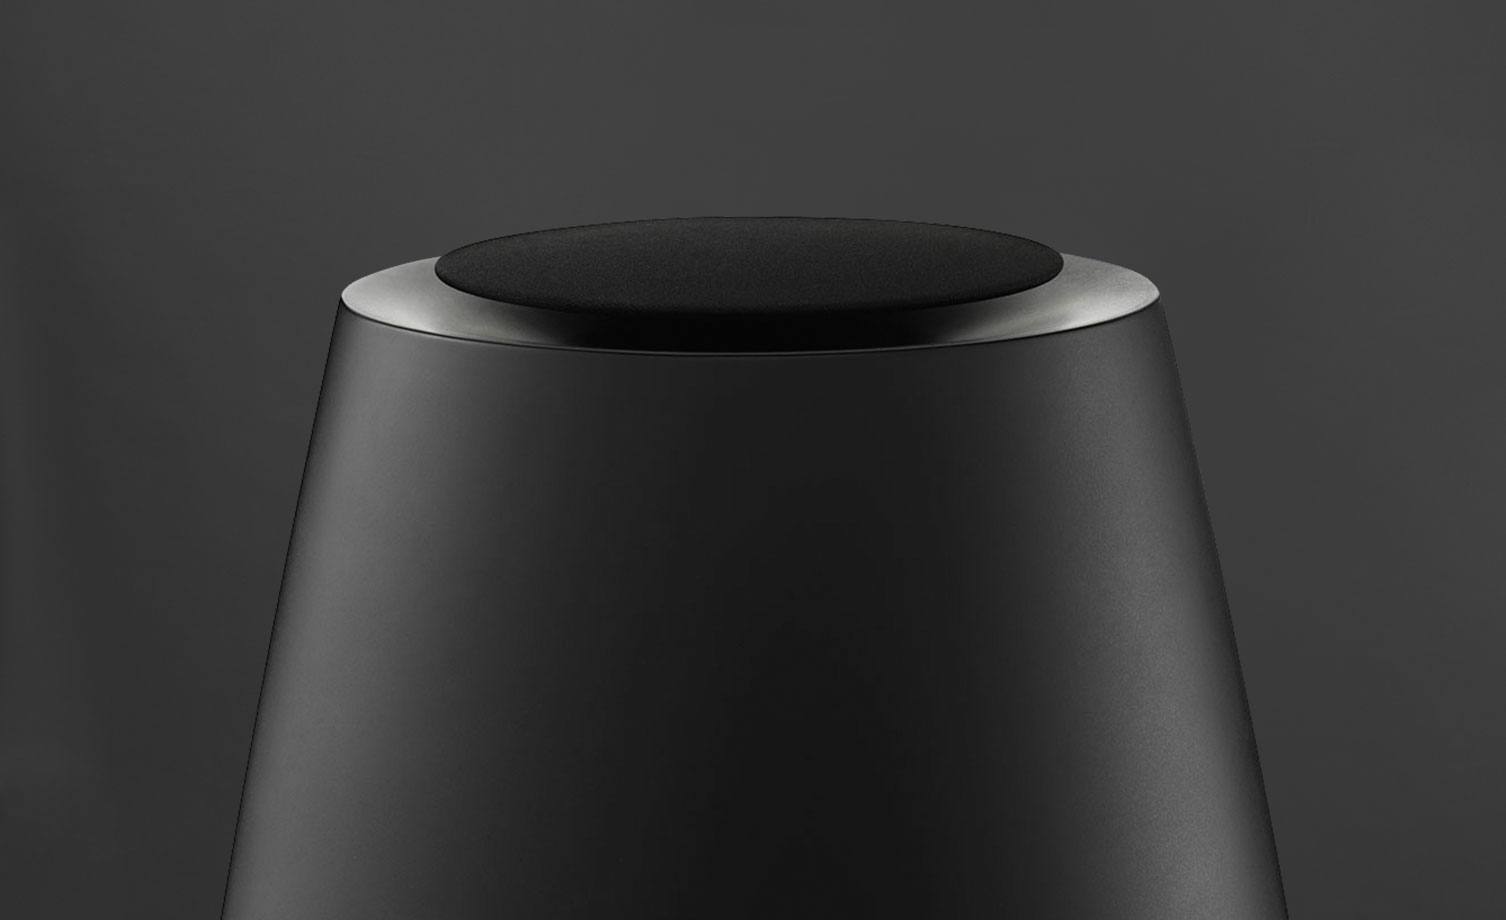 bang-olufsen-beoplay-s8-entry-level-wireless-speakers-priced-under-17003